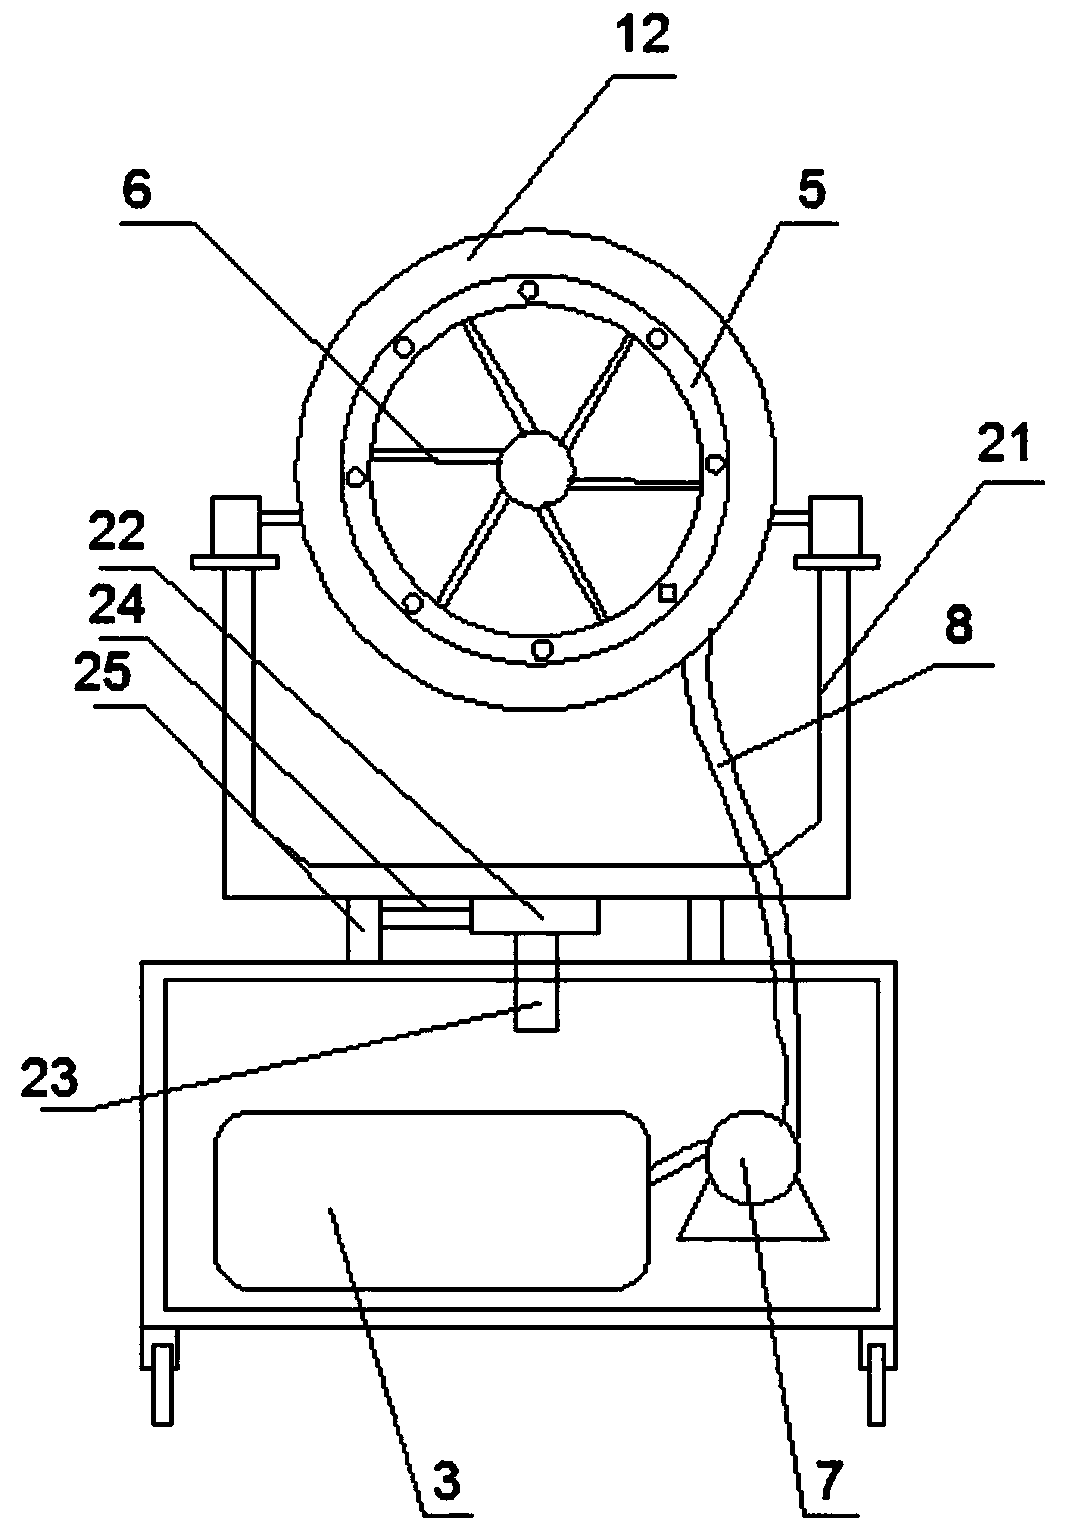 Rotatable moisture conditioning device for granary